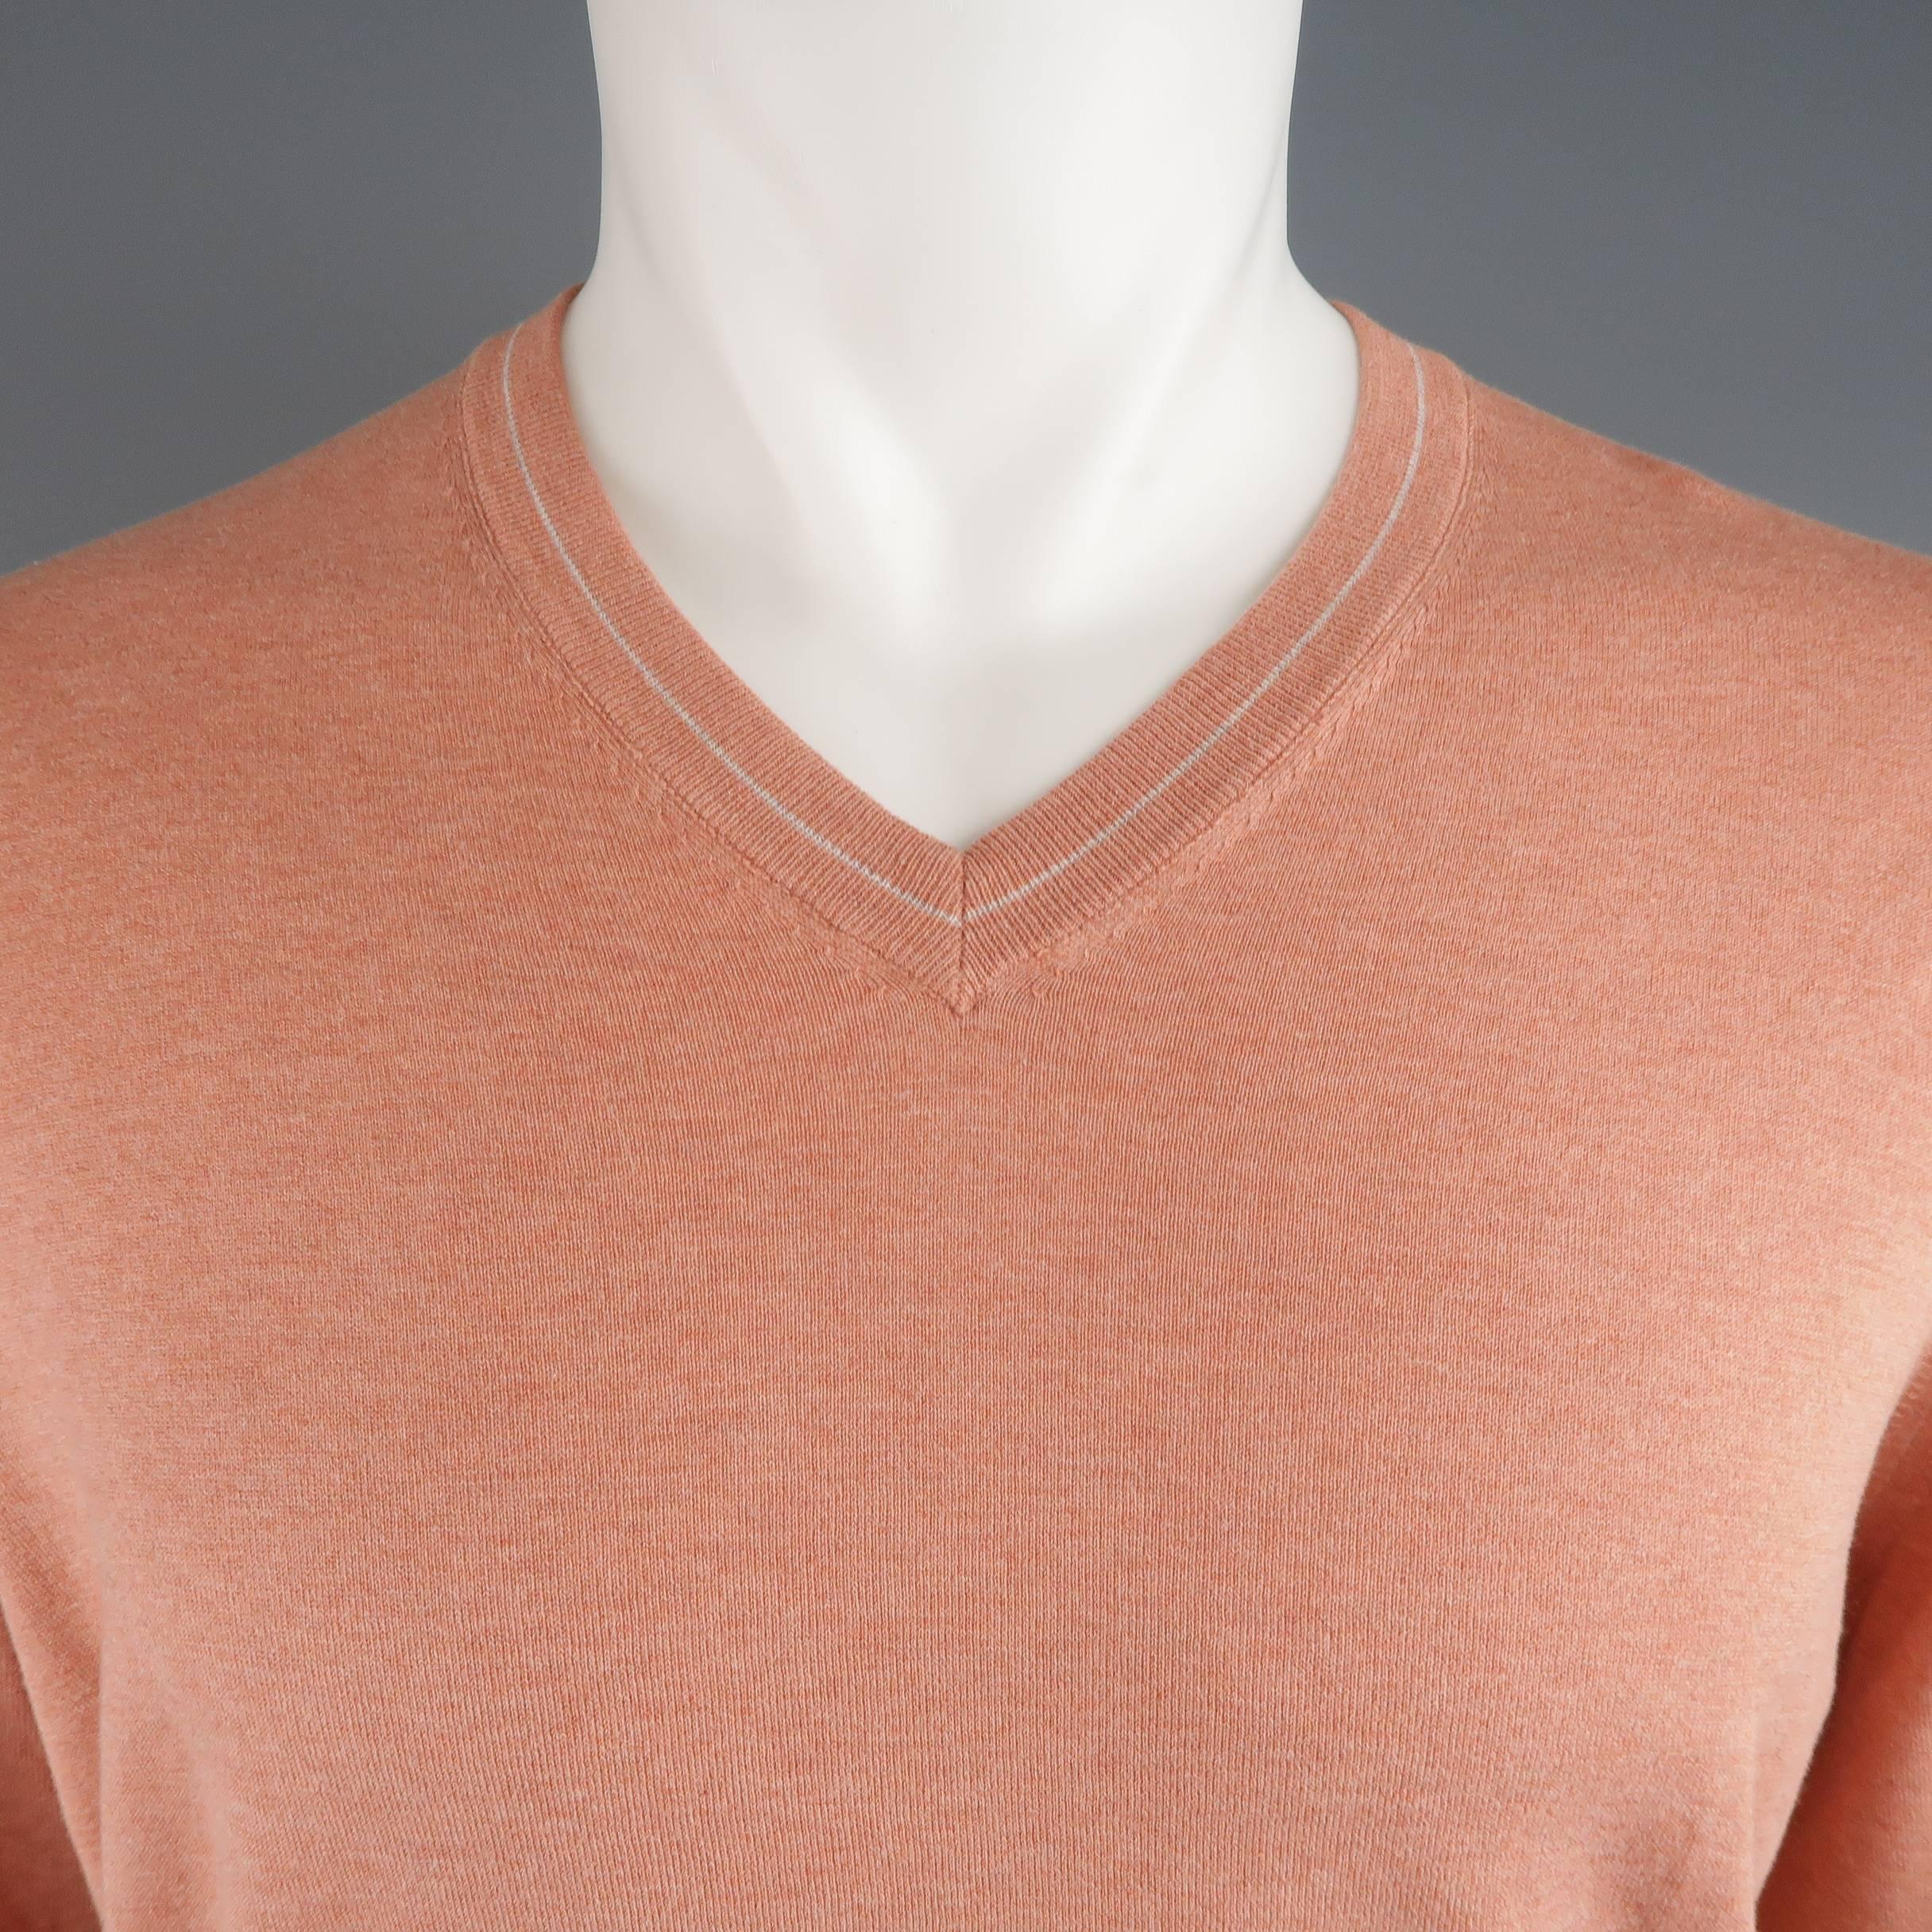 Classic BRUNELLO CUCINELLI pullover sweater comes in a heather textured, muted salmon pink, light weight cotton knit with a gray striped V neck. Made in Italy.
 
Excellent Pre-Owned Condition.
Marked: IT 48
 
Measurements:
 
Shoulder: 19 in.
Chest: